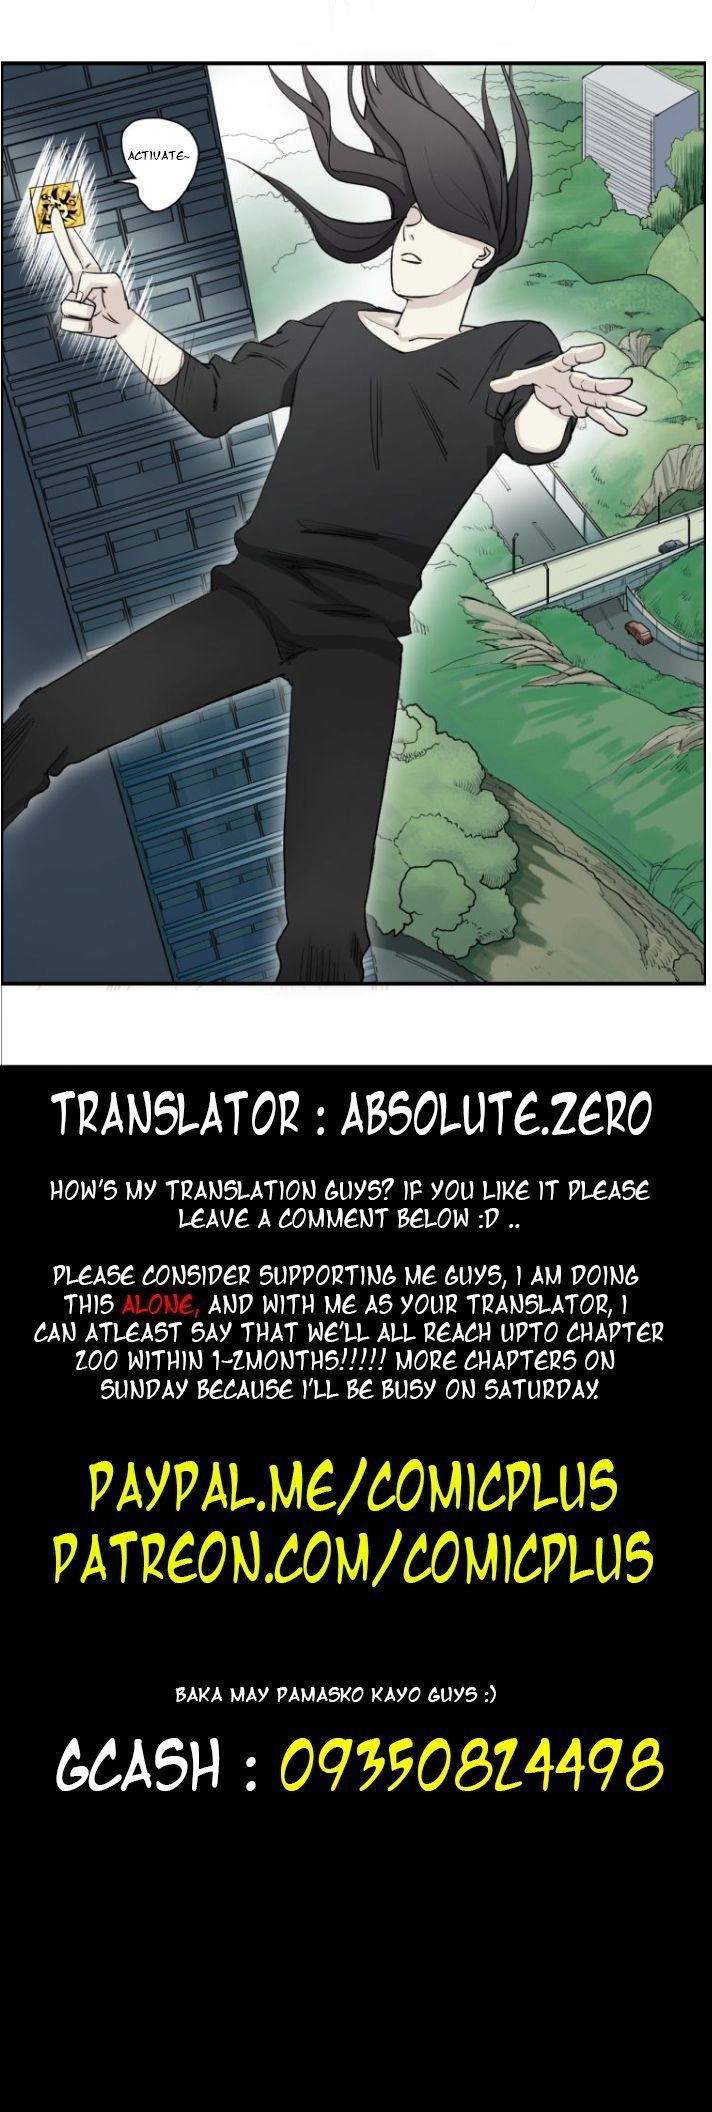 Super Cube Chapter 25 page 6